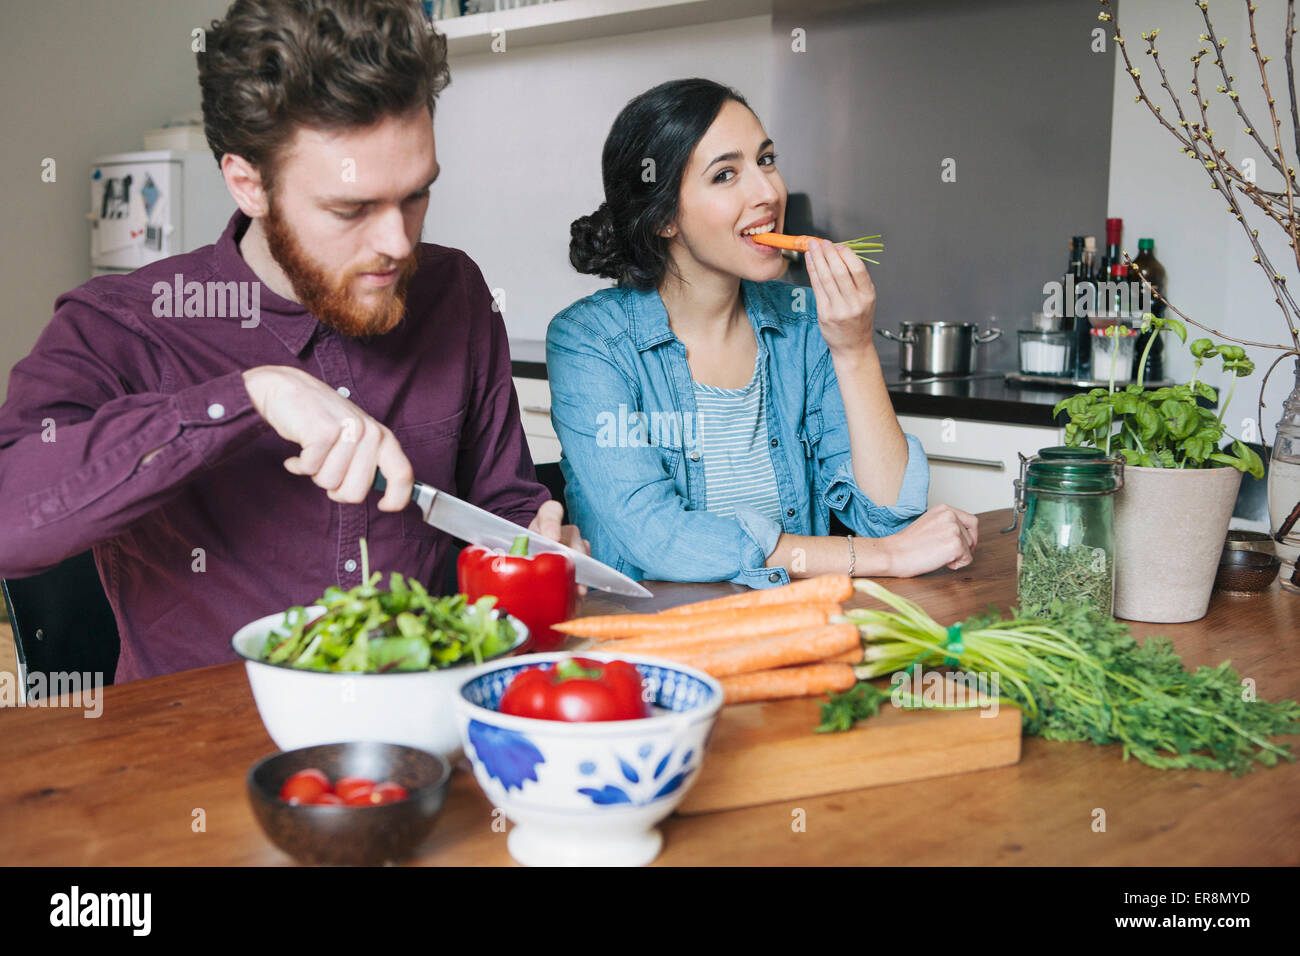 Young man chopping red bell pepper beside woman eating carrot at kitchen table Stock Photo